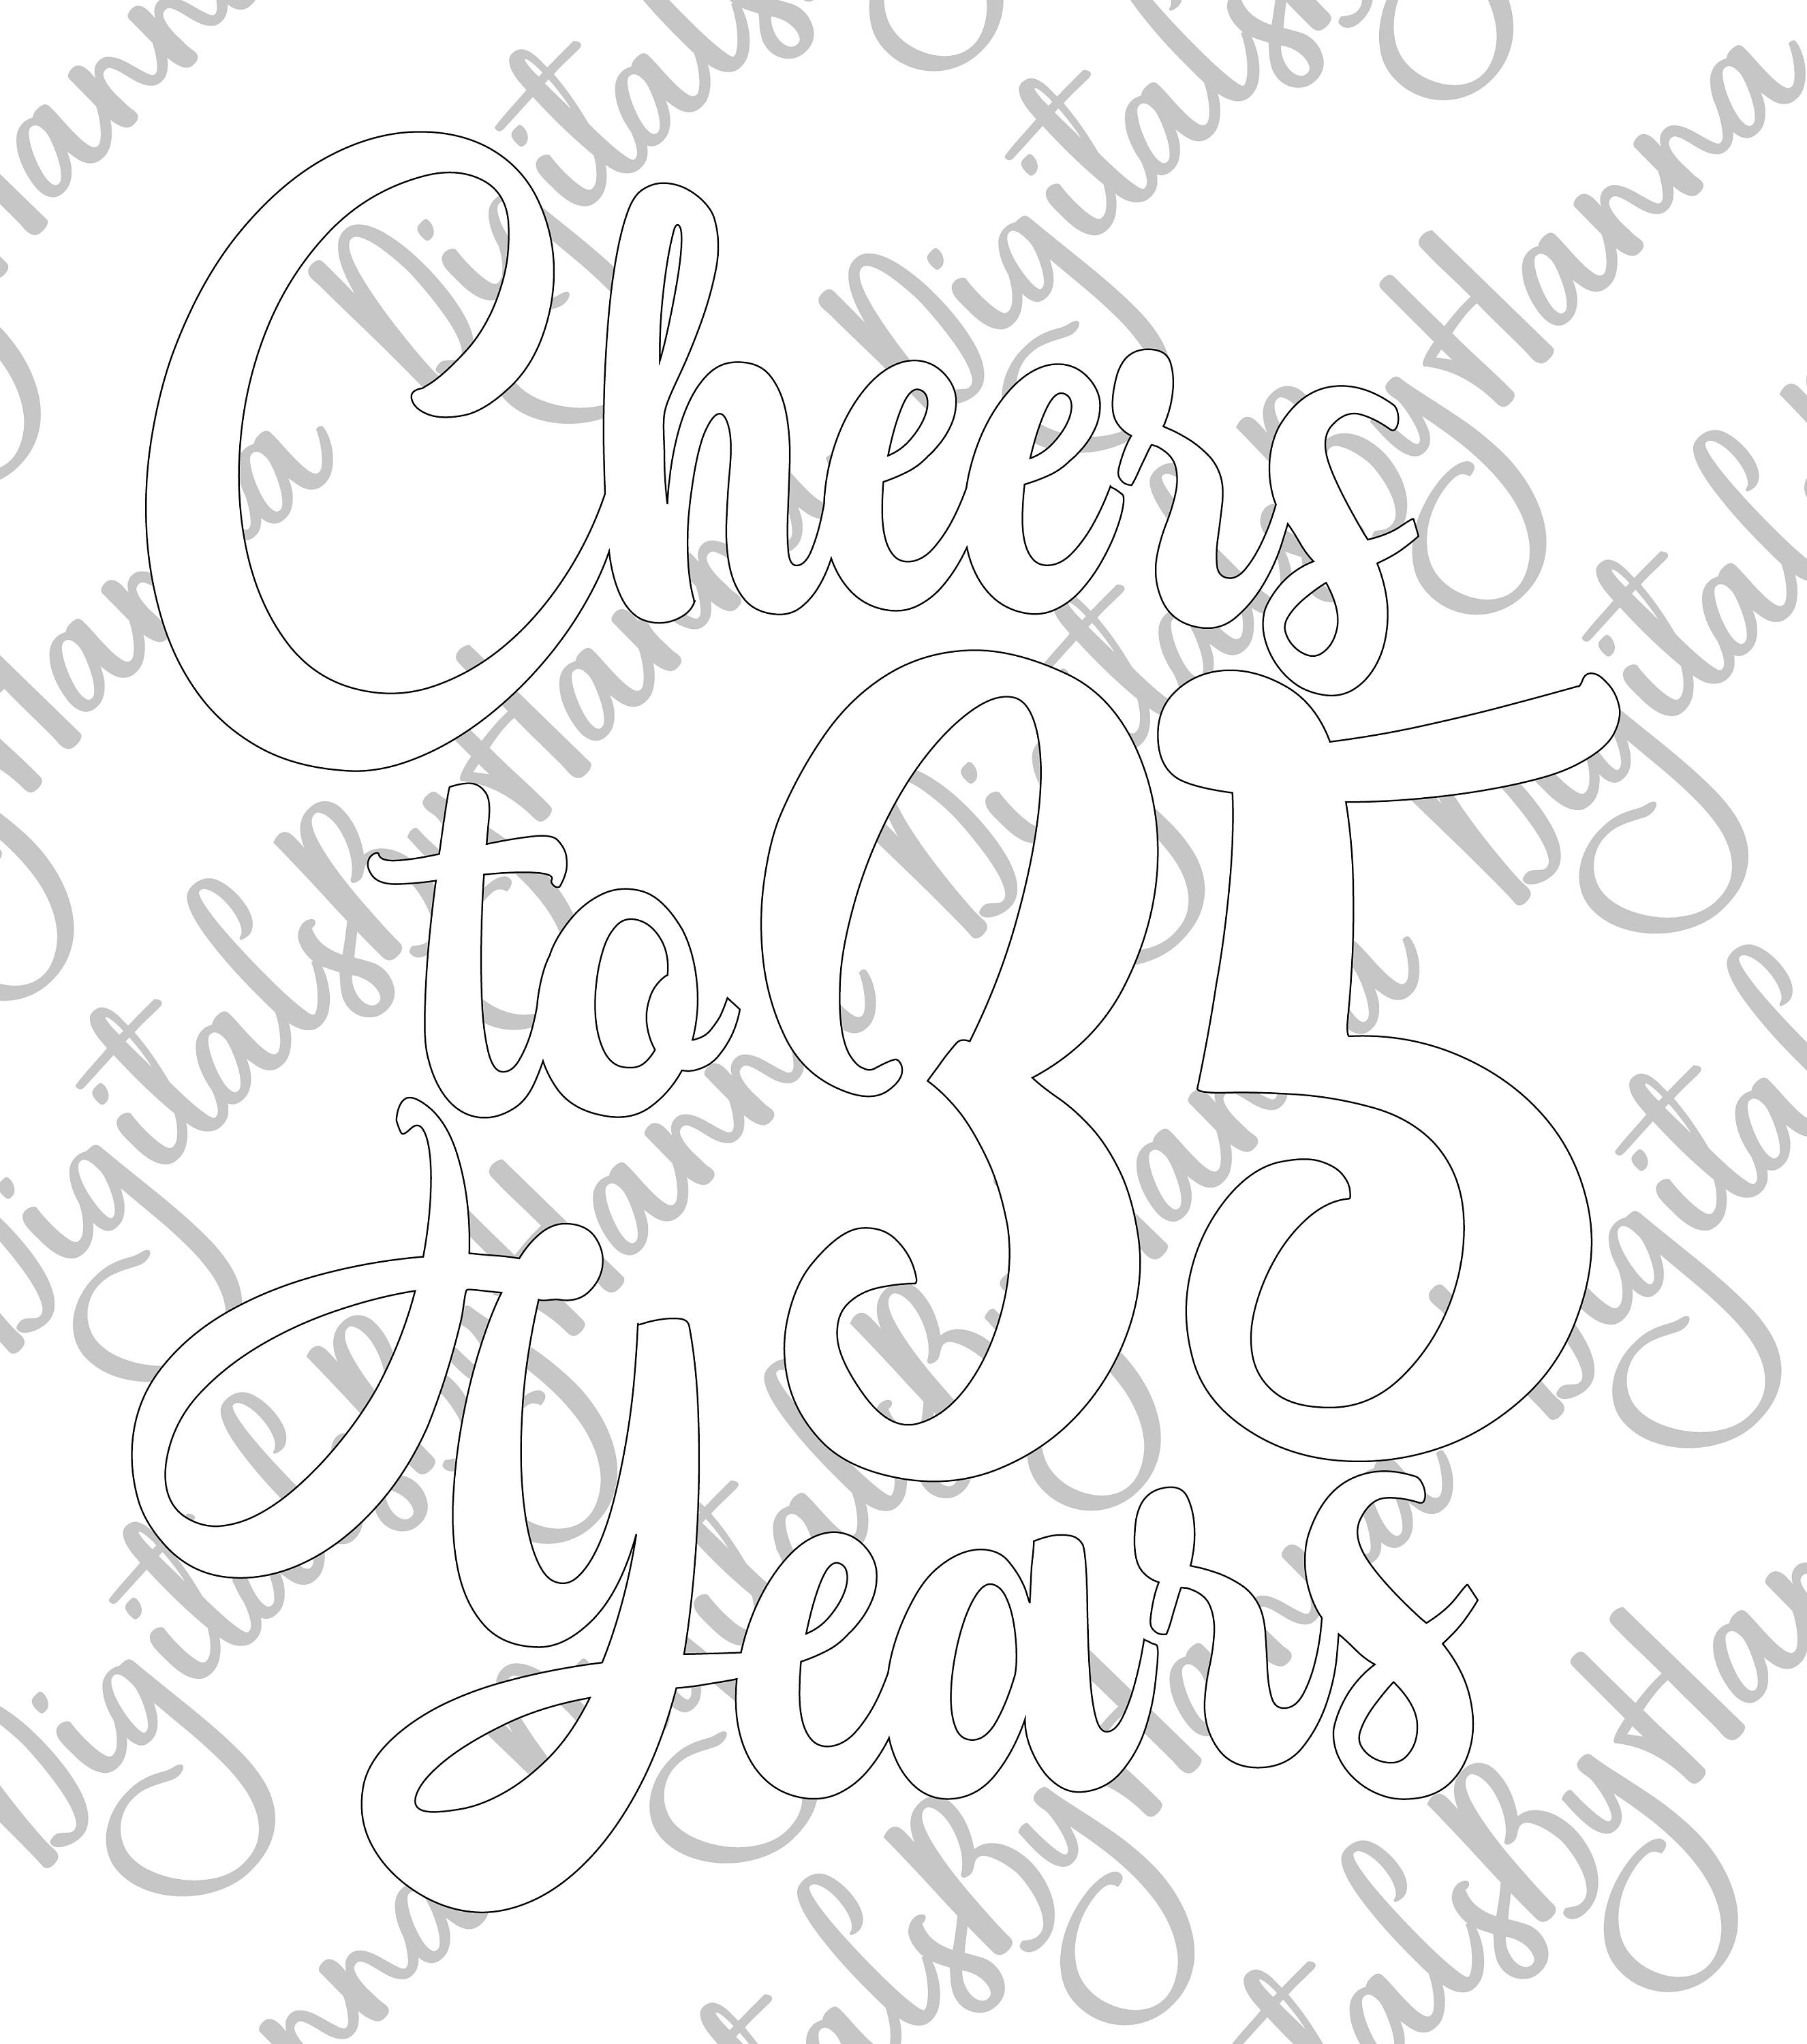 35th Birthday SVG Files for Cricut Saying Cheers to 35 Year | Etsy